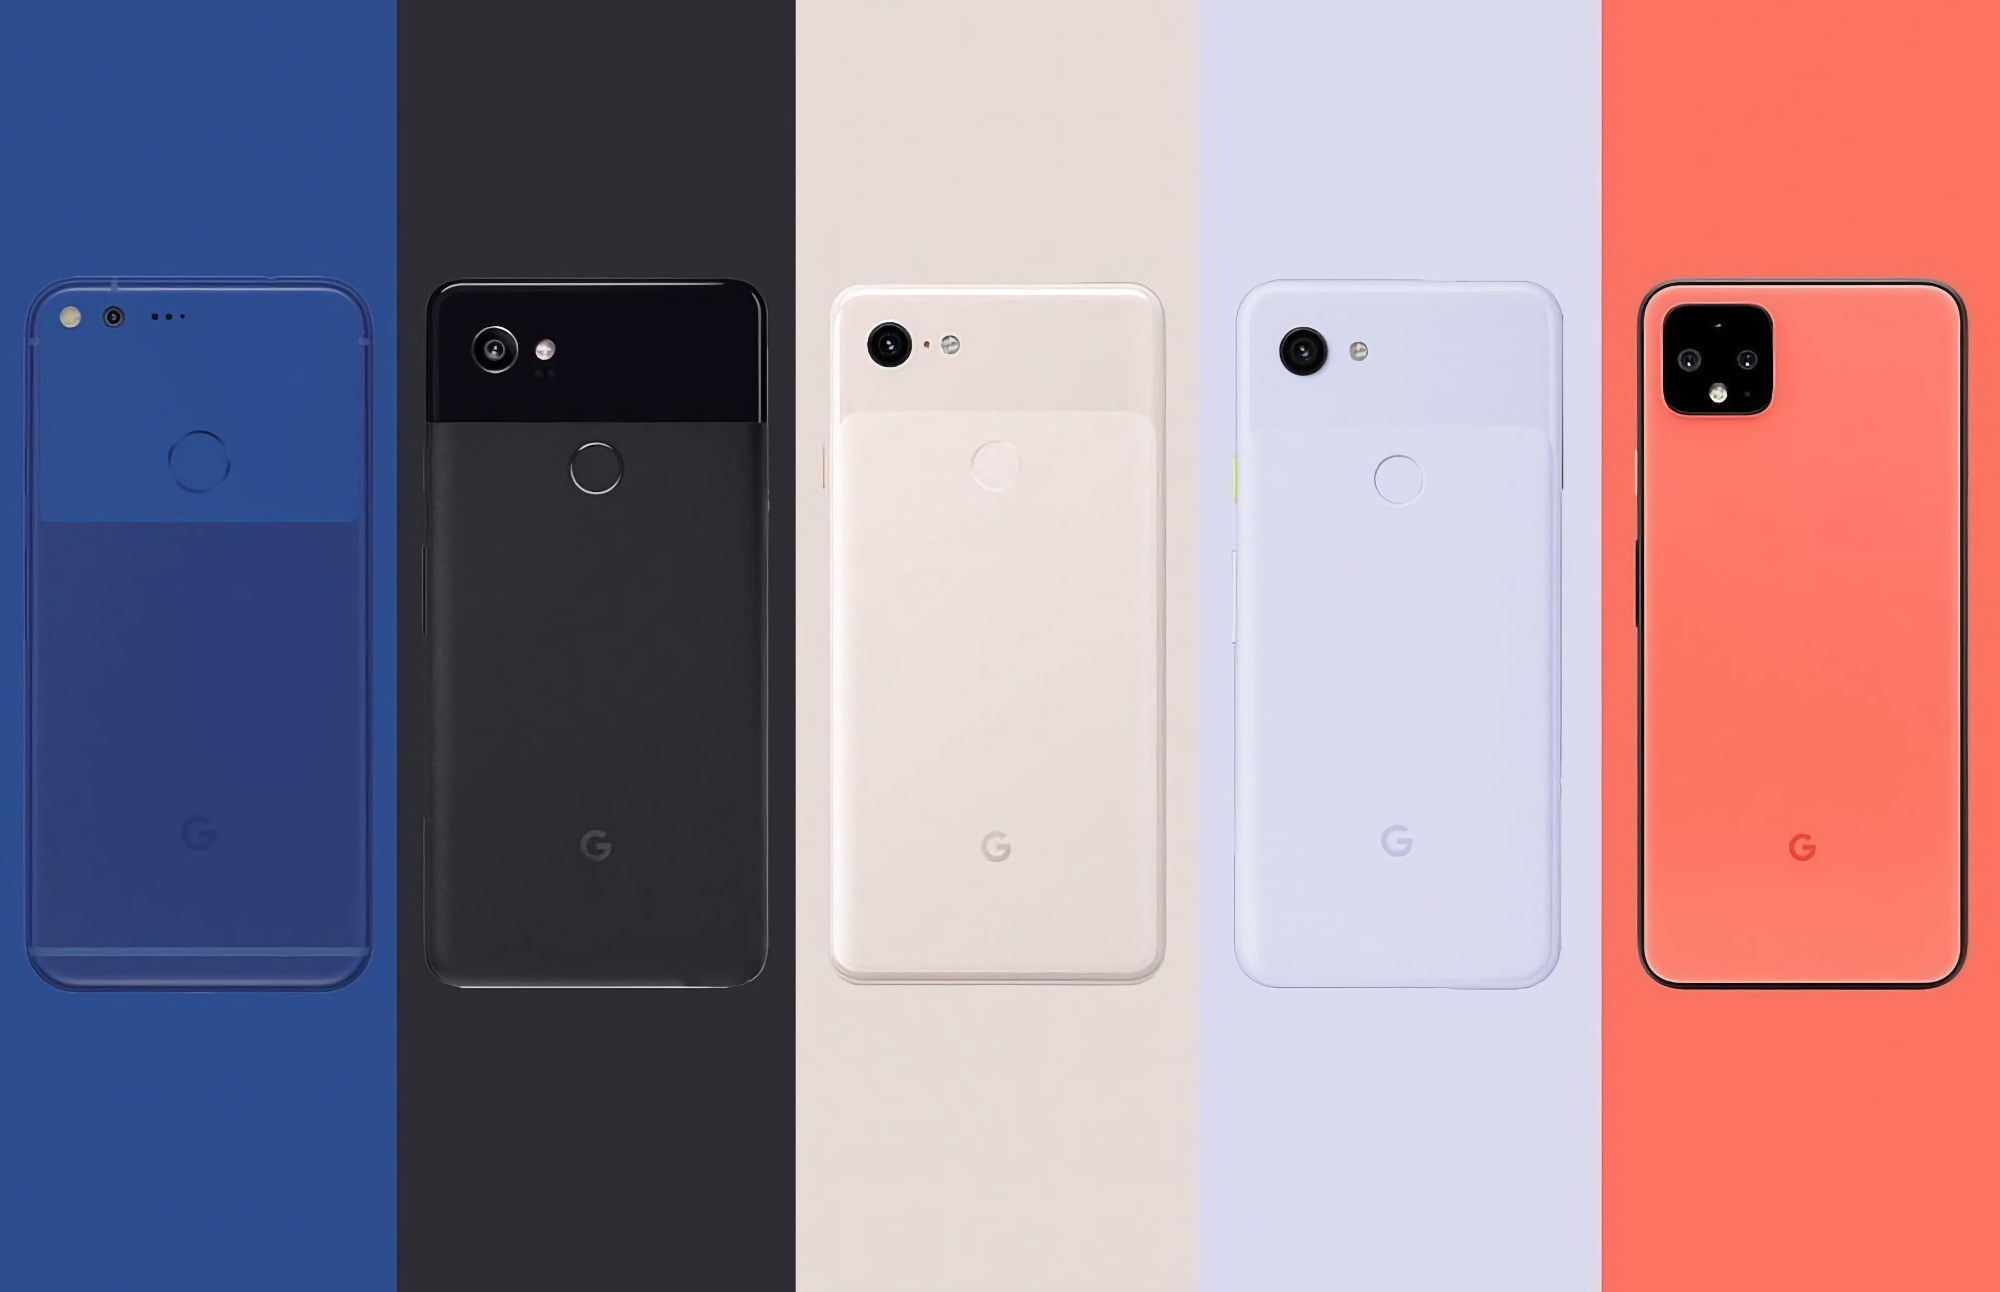 Google has sold 27.6 million Pixel smartphones in 6 years, only 1/10th of all Samsung smartphones sold in 2021